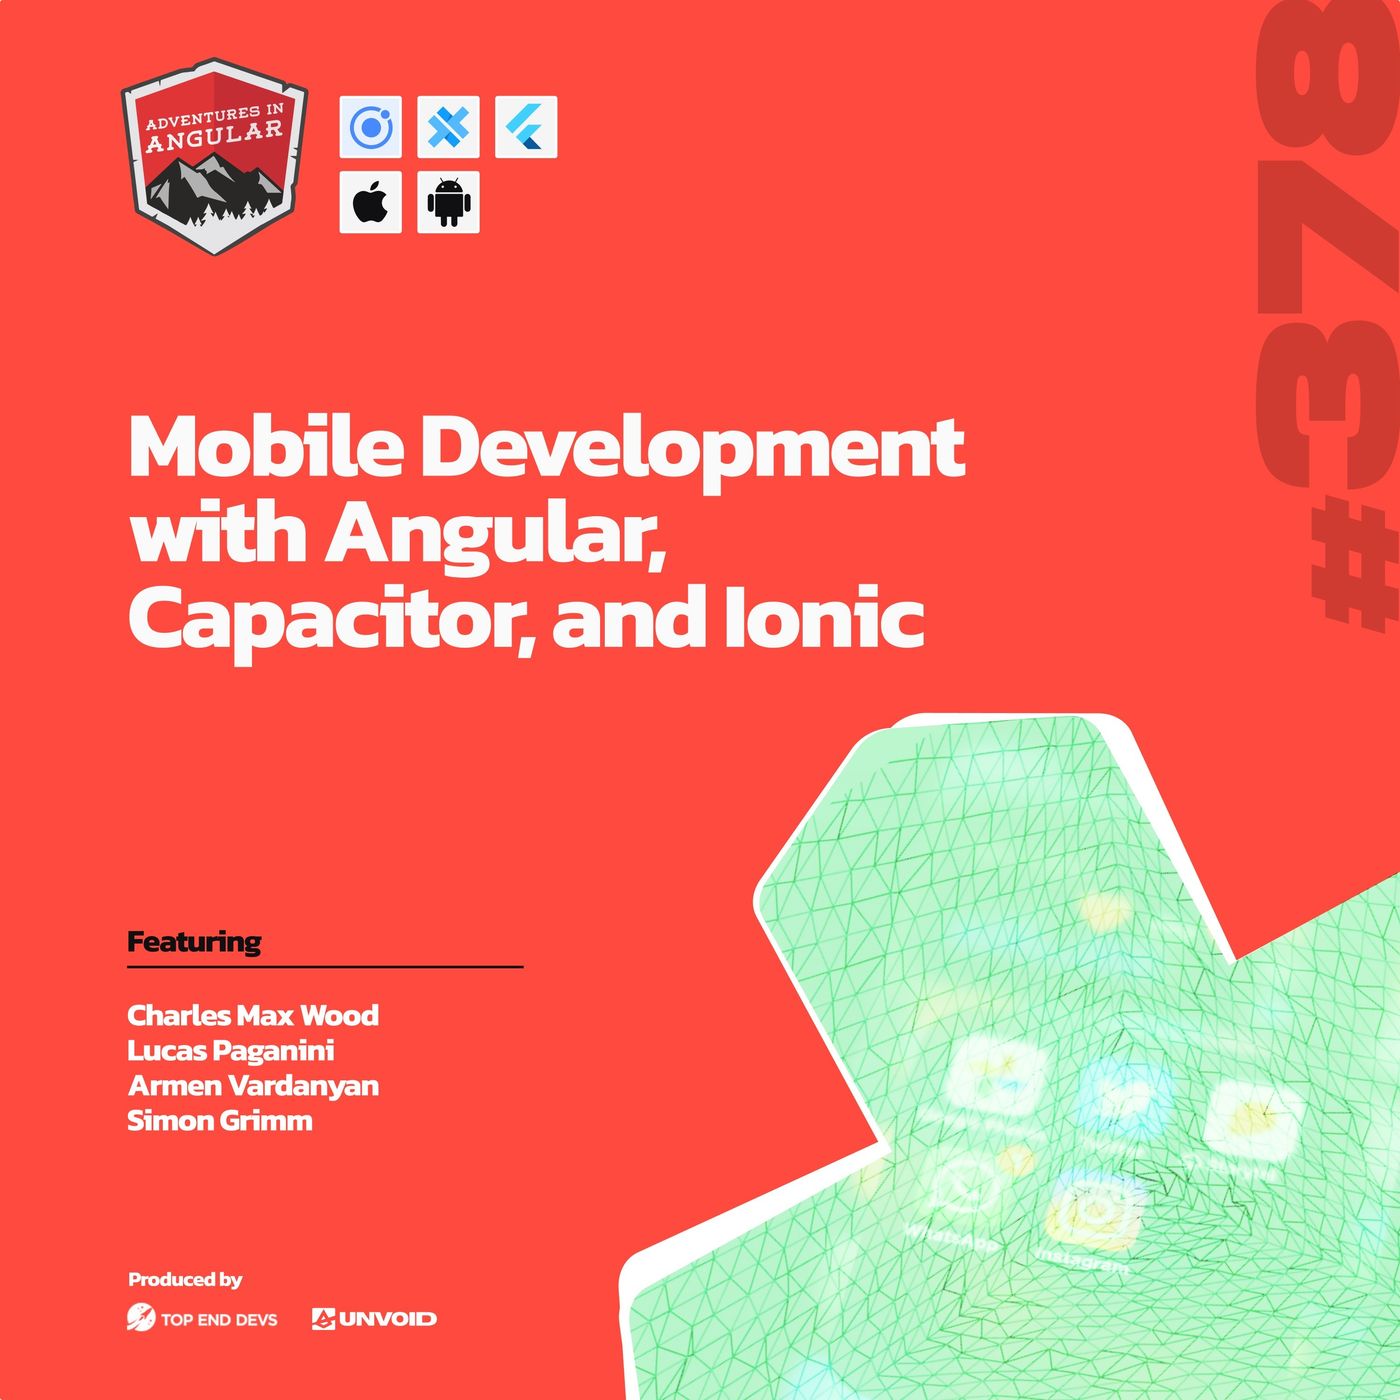 Mobile Development with Angular, Capacitor, and Ionic - AiA 378